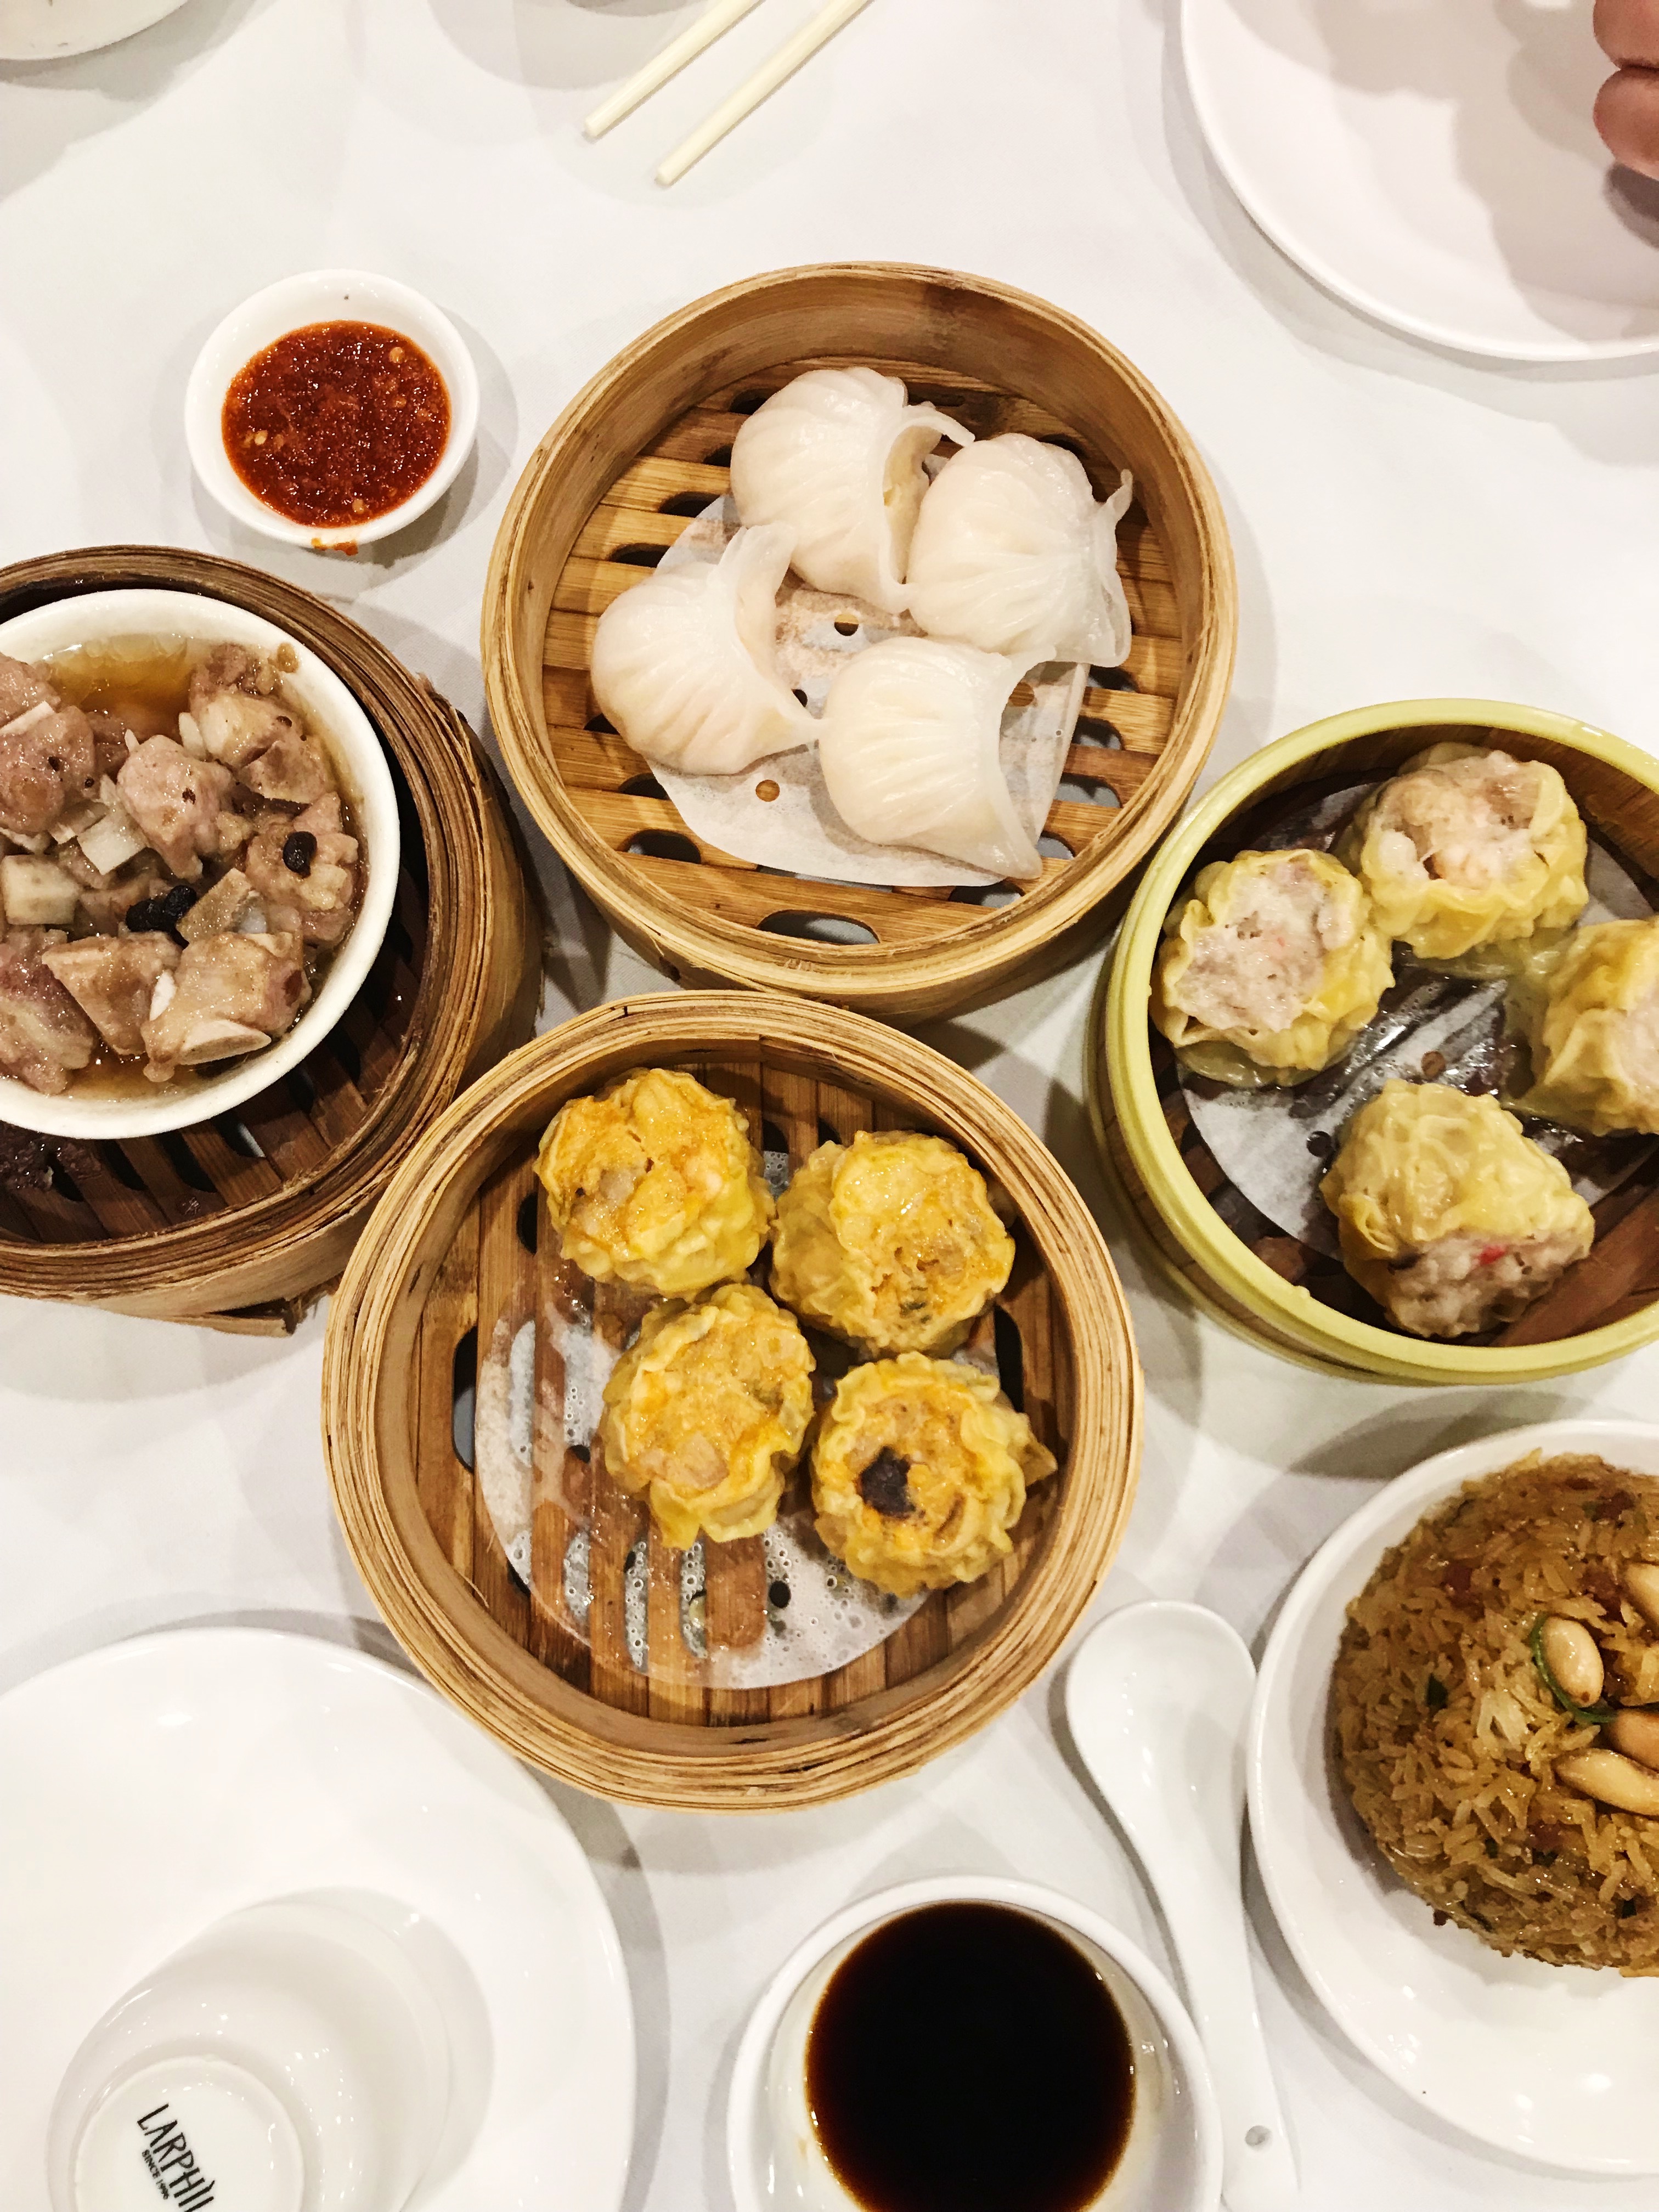 Dish of the Week | Dim Sum from Hei La Moon - Confessions of a Chocoholic